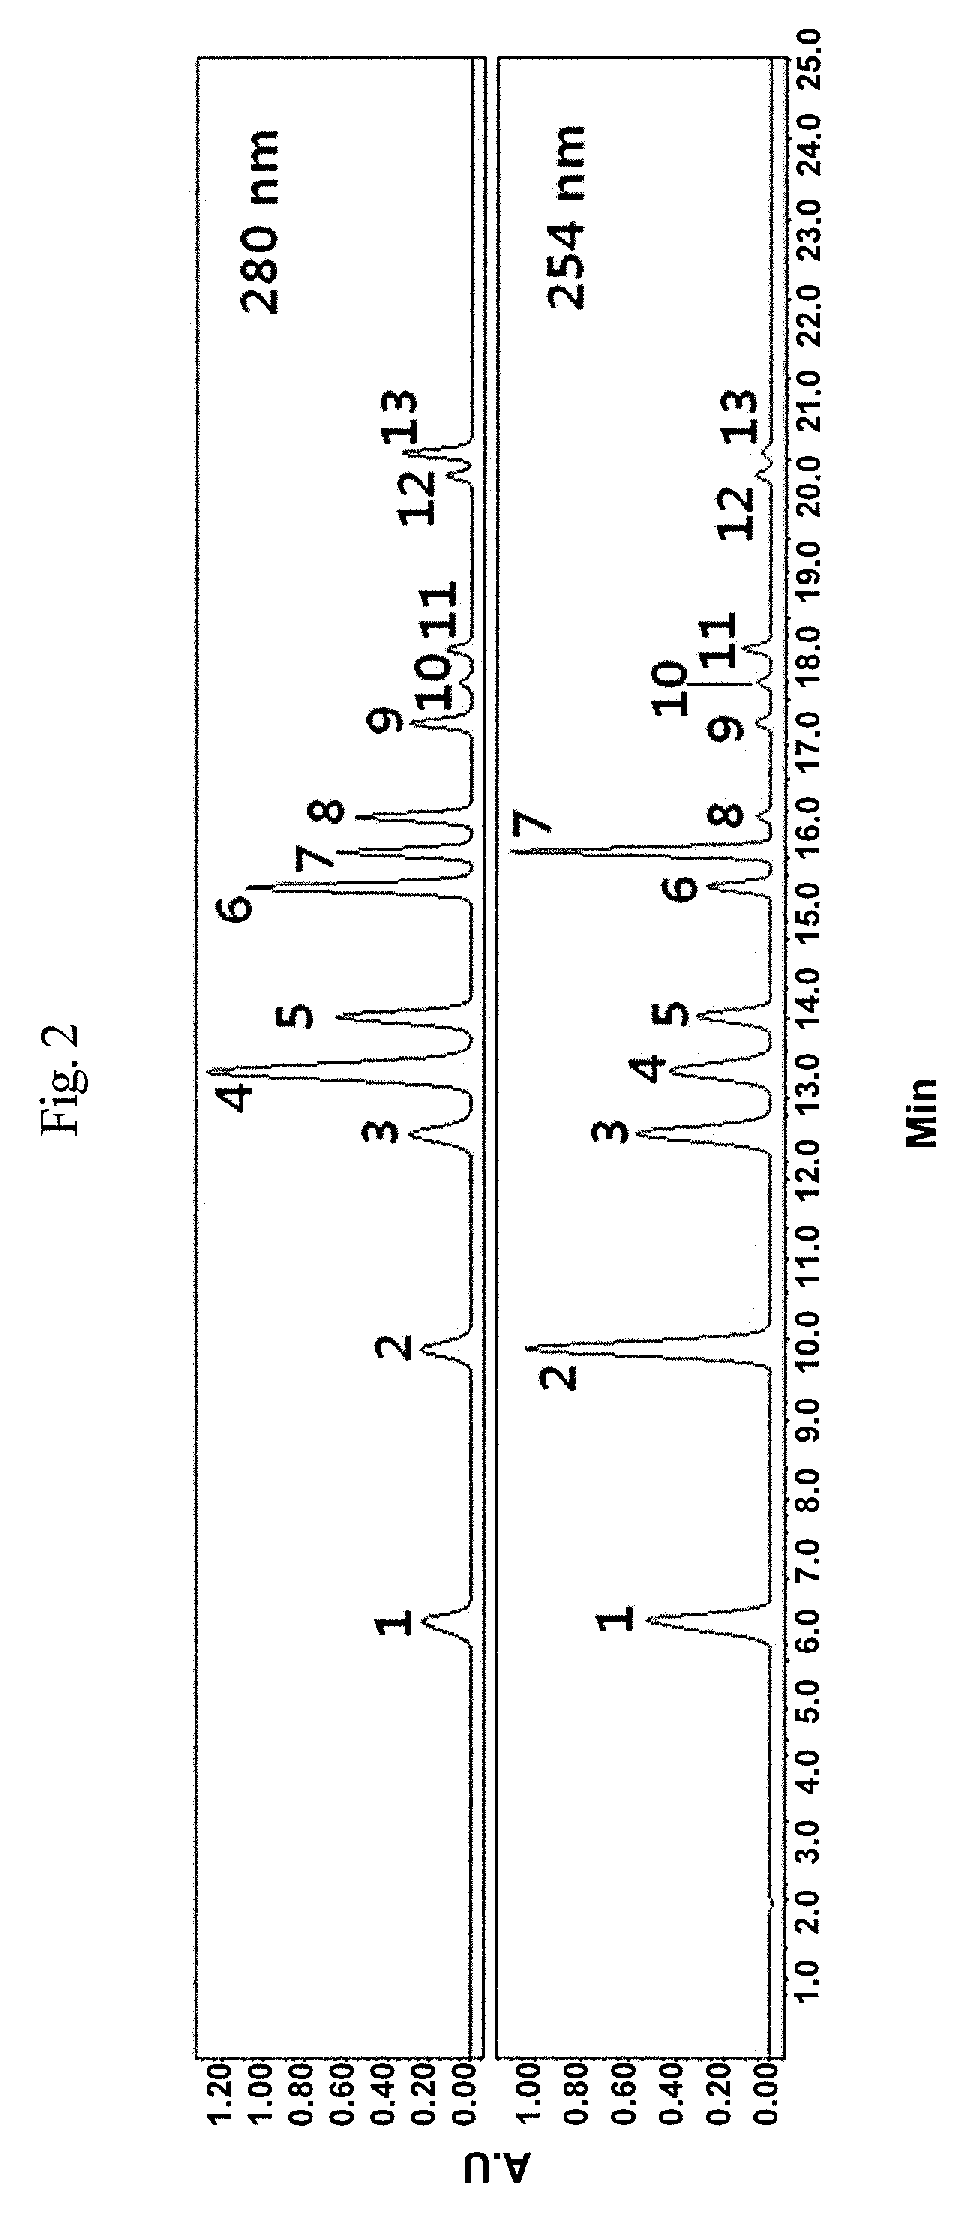 Process of biologically producing a p-hydroxybenzoic acid